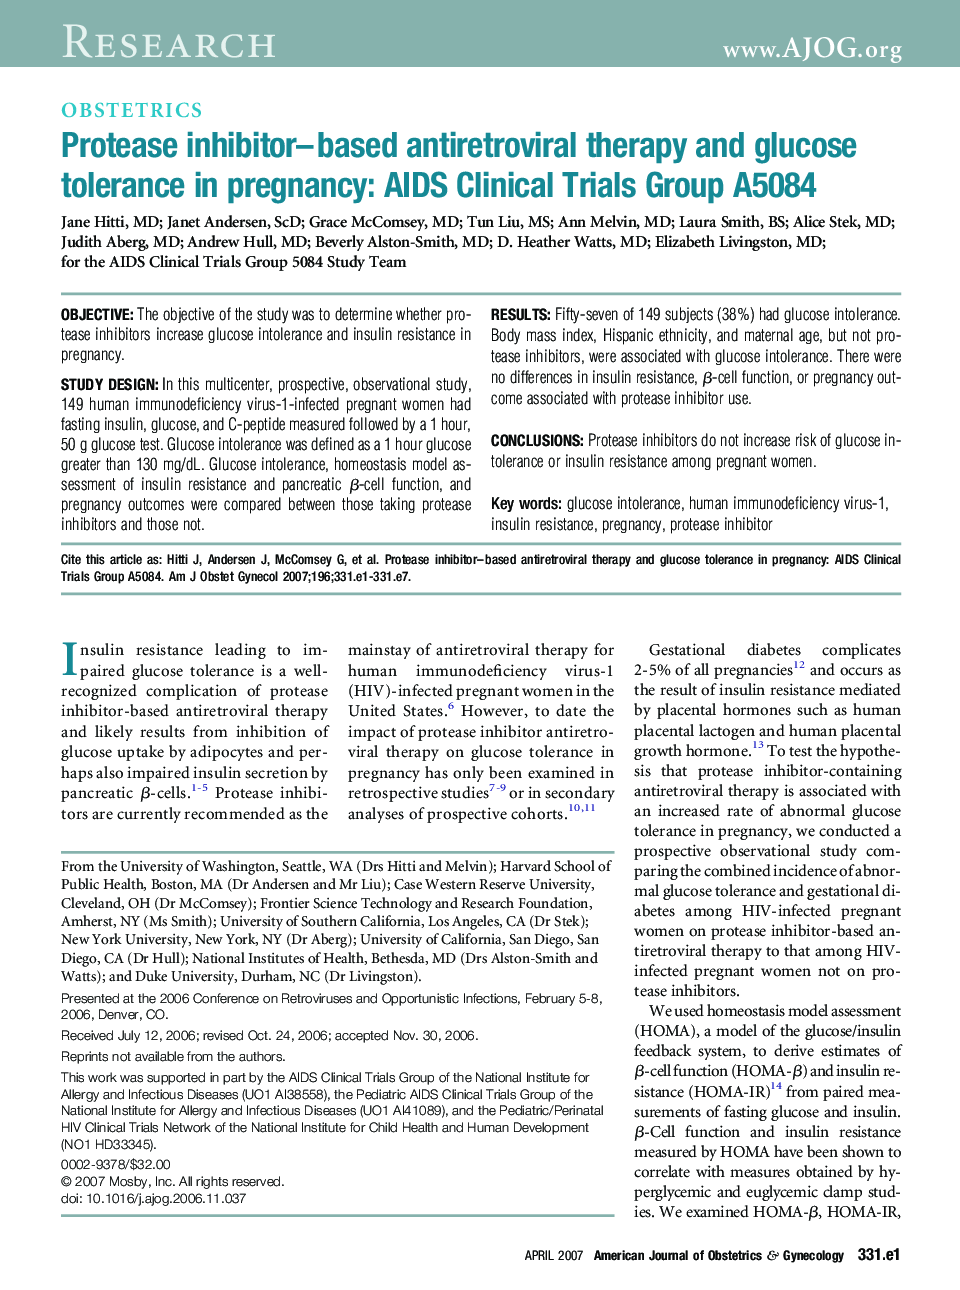 Protease inhibitor-based antiretroviral therapy and glucose tolerance in pregnancy: AIDS Clinical Trials Group A5084